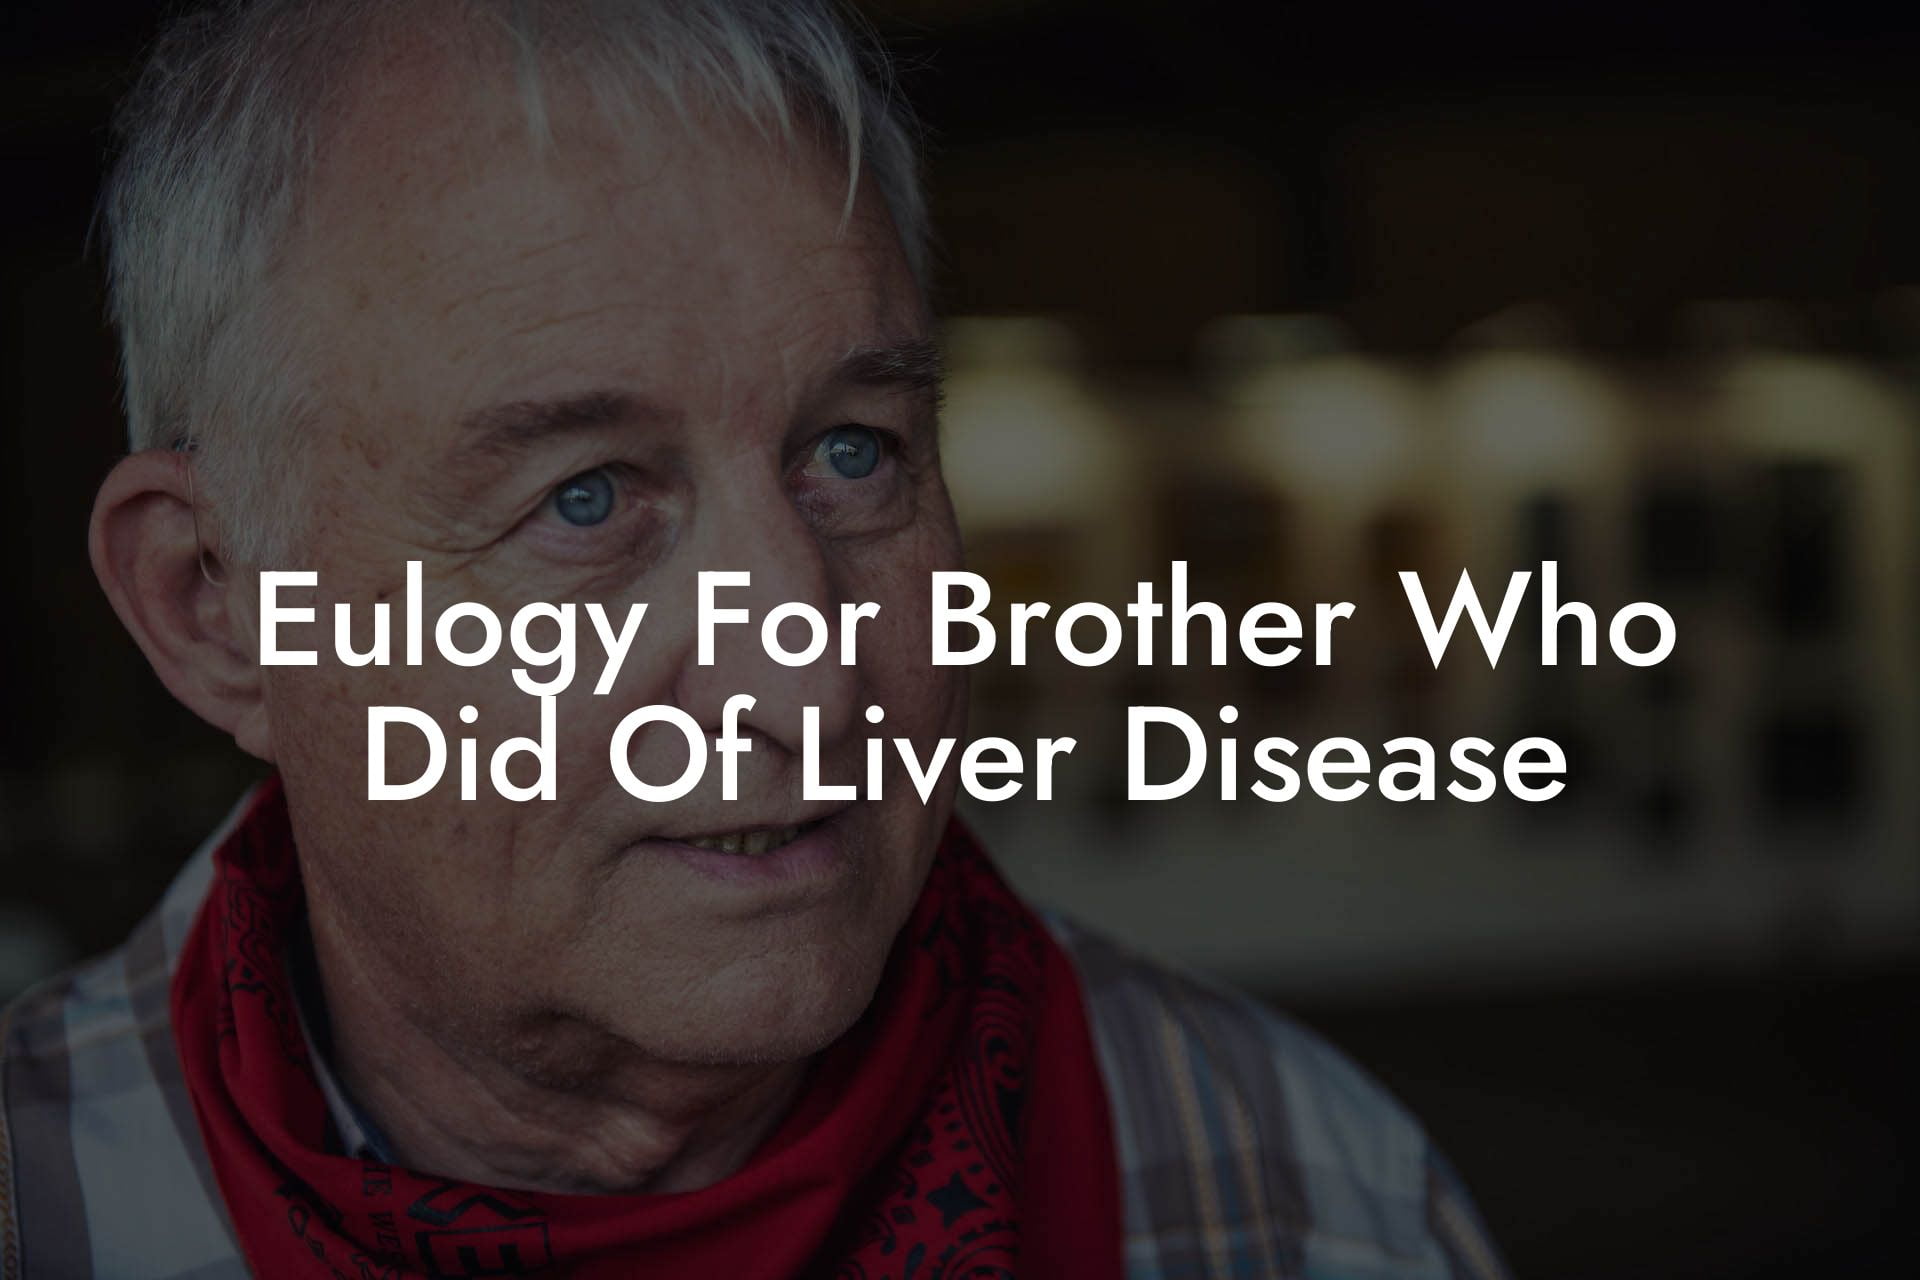 Eulogy For Brother Who Did Of Liver Disease